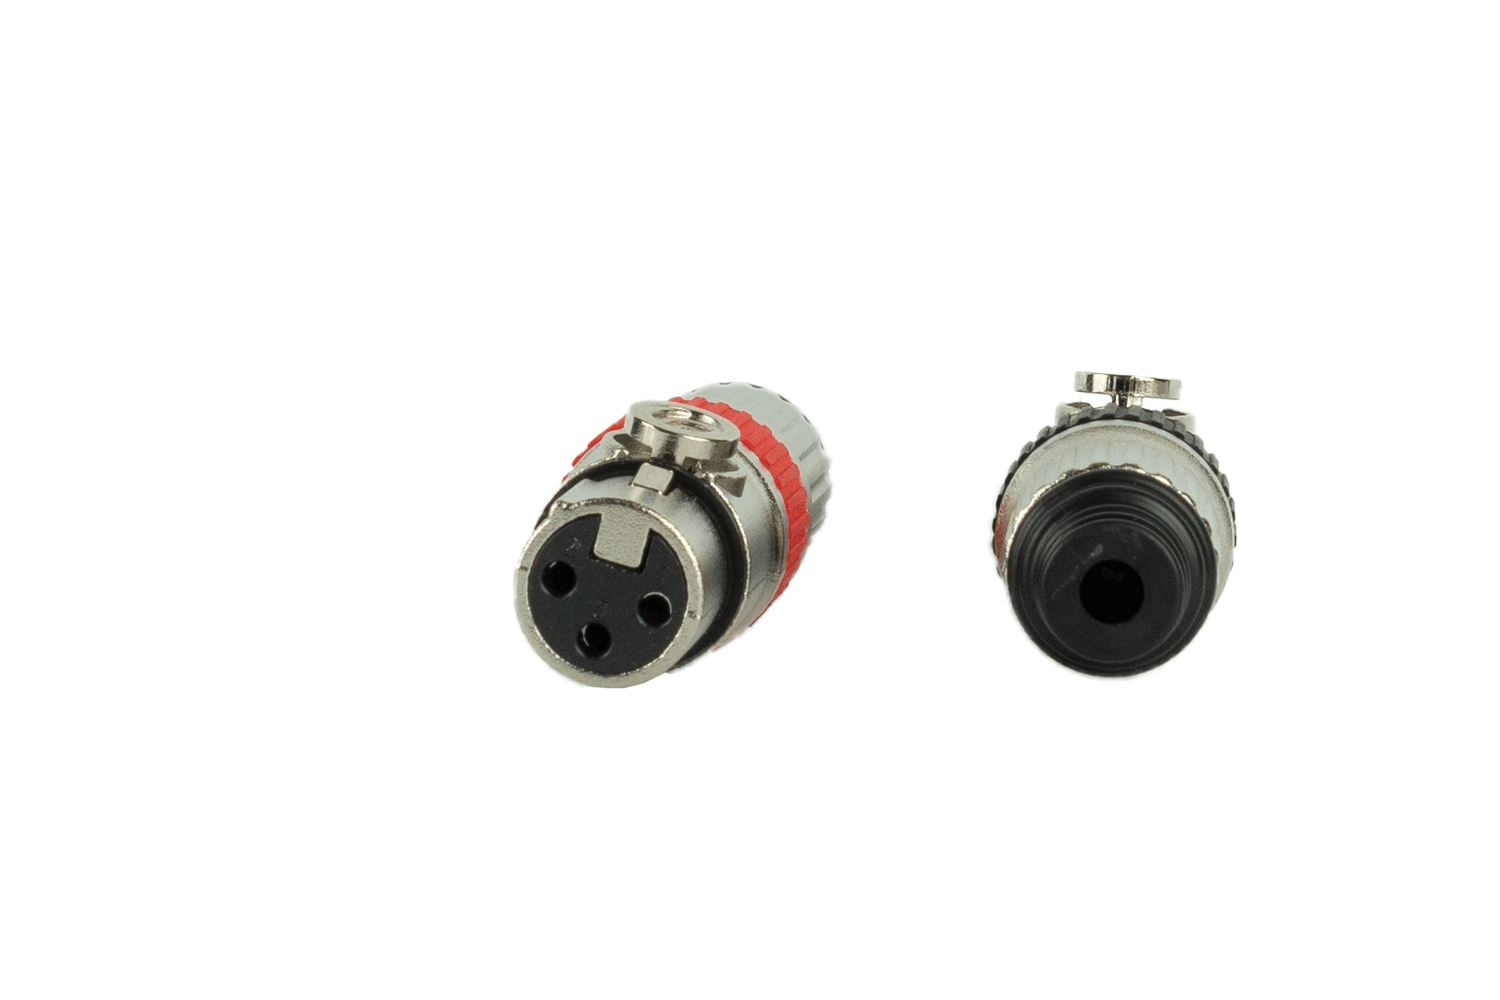 Event Audio XLRM - Pair of XLR 3 Pin Male Audio Plugs top view 